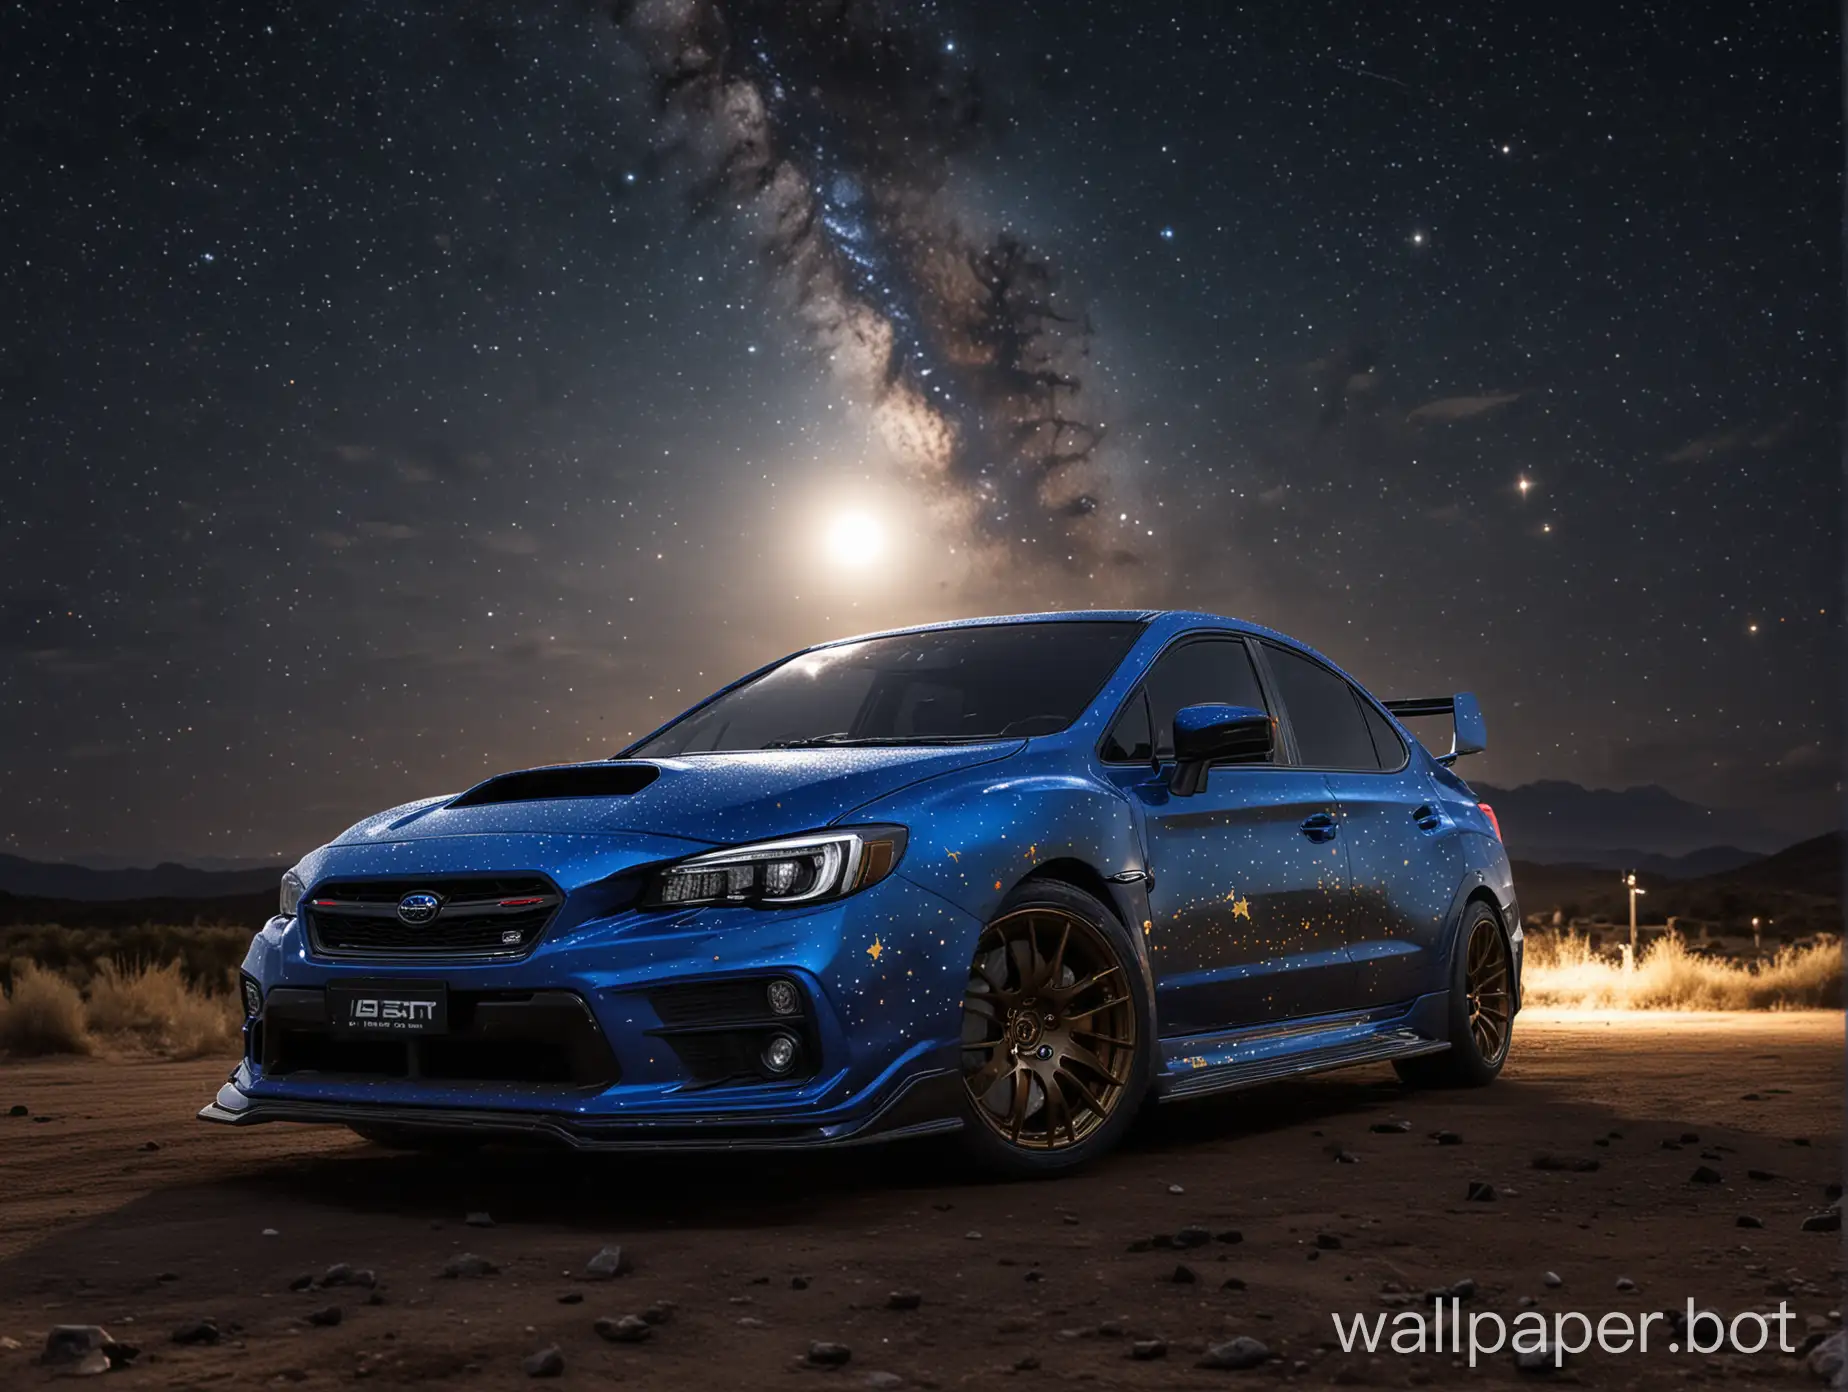 create 4k wallpaper of subaru wrx sti high detailed ultra with moon in sky with stars